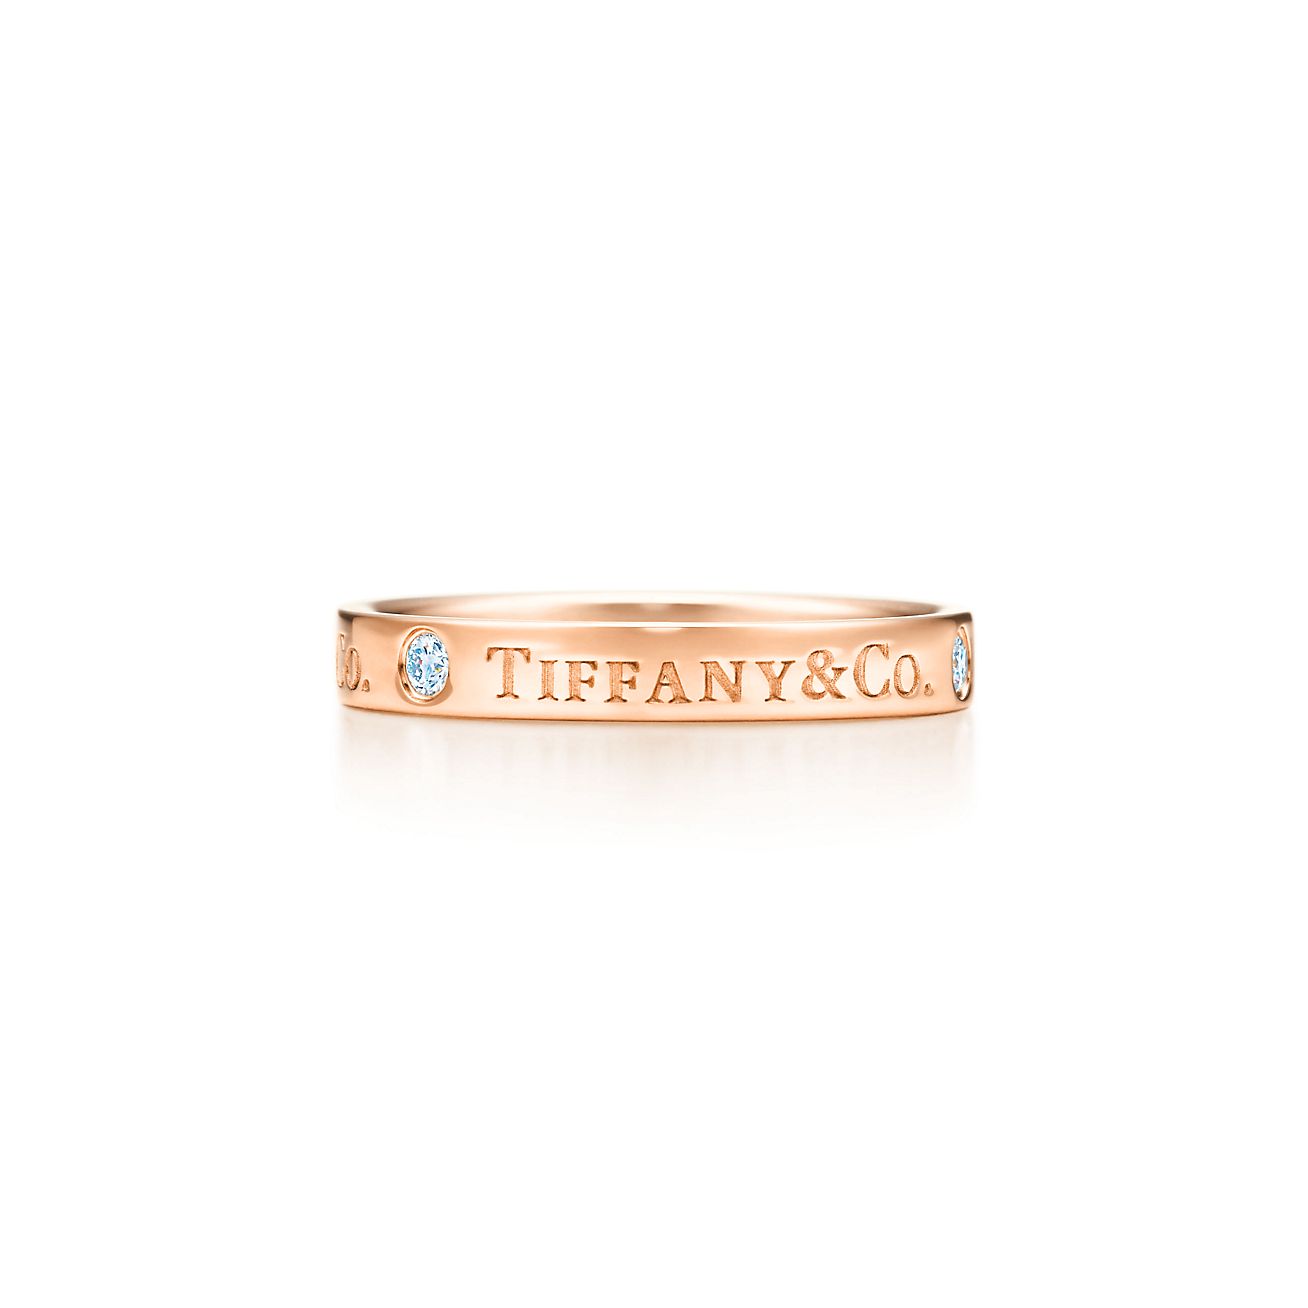 tiff and co ring